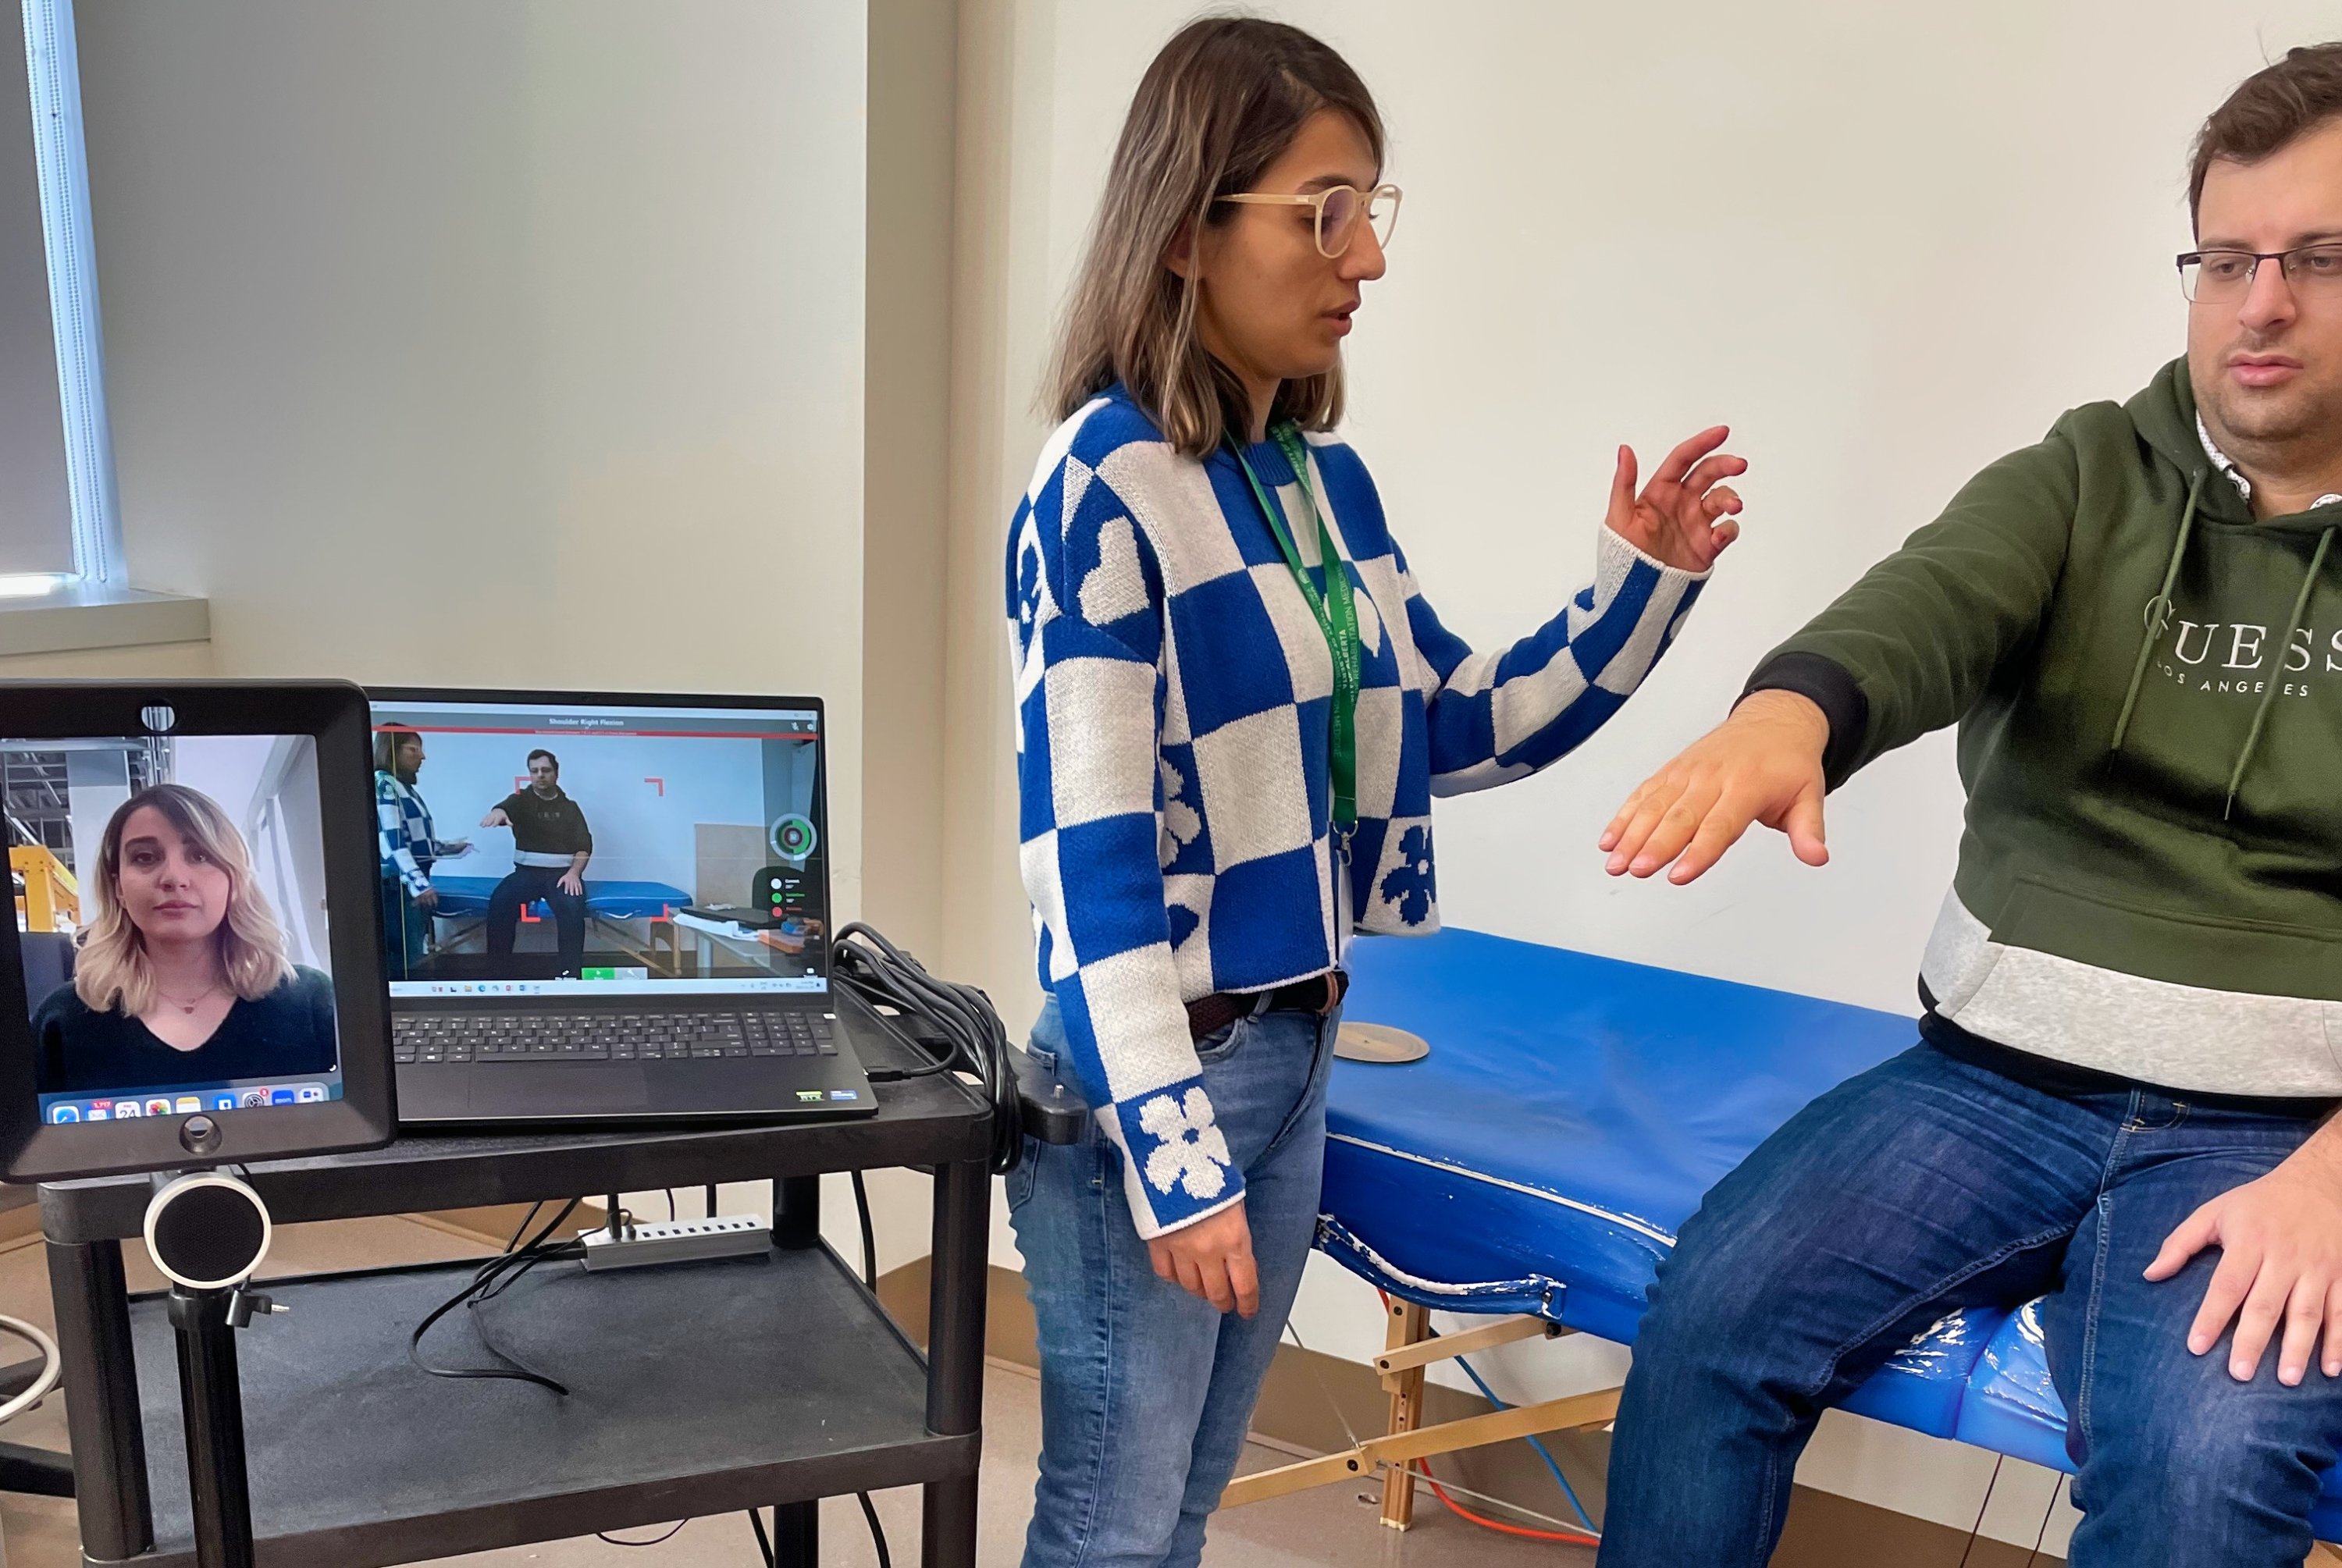 Students Mahtab (standing) and Javad (seated) practise a telerehabilitation procedure using markerless motion capture to measure a patient’s shoulder range of motion. (Photo: Supplied)